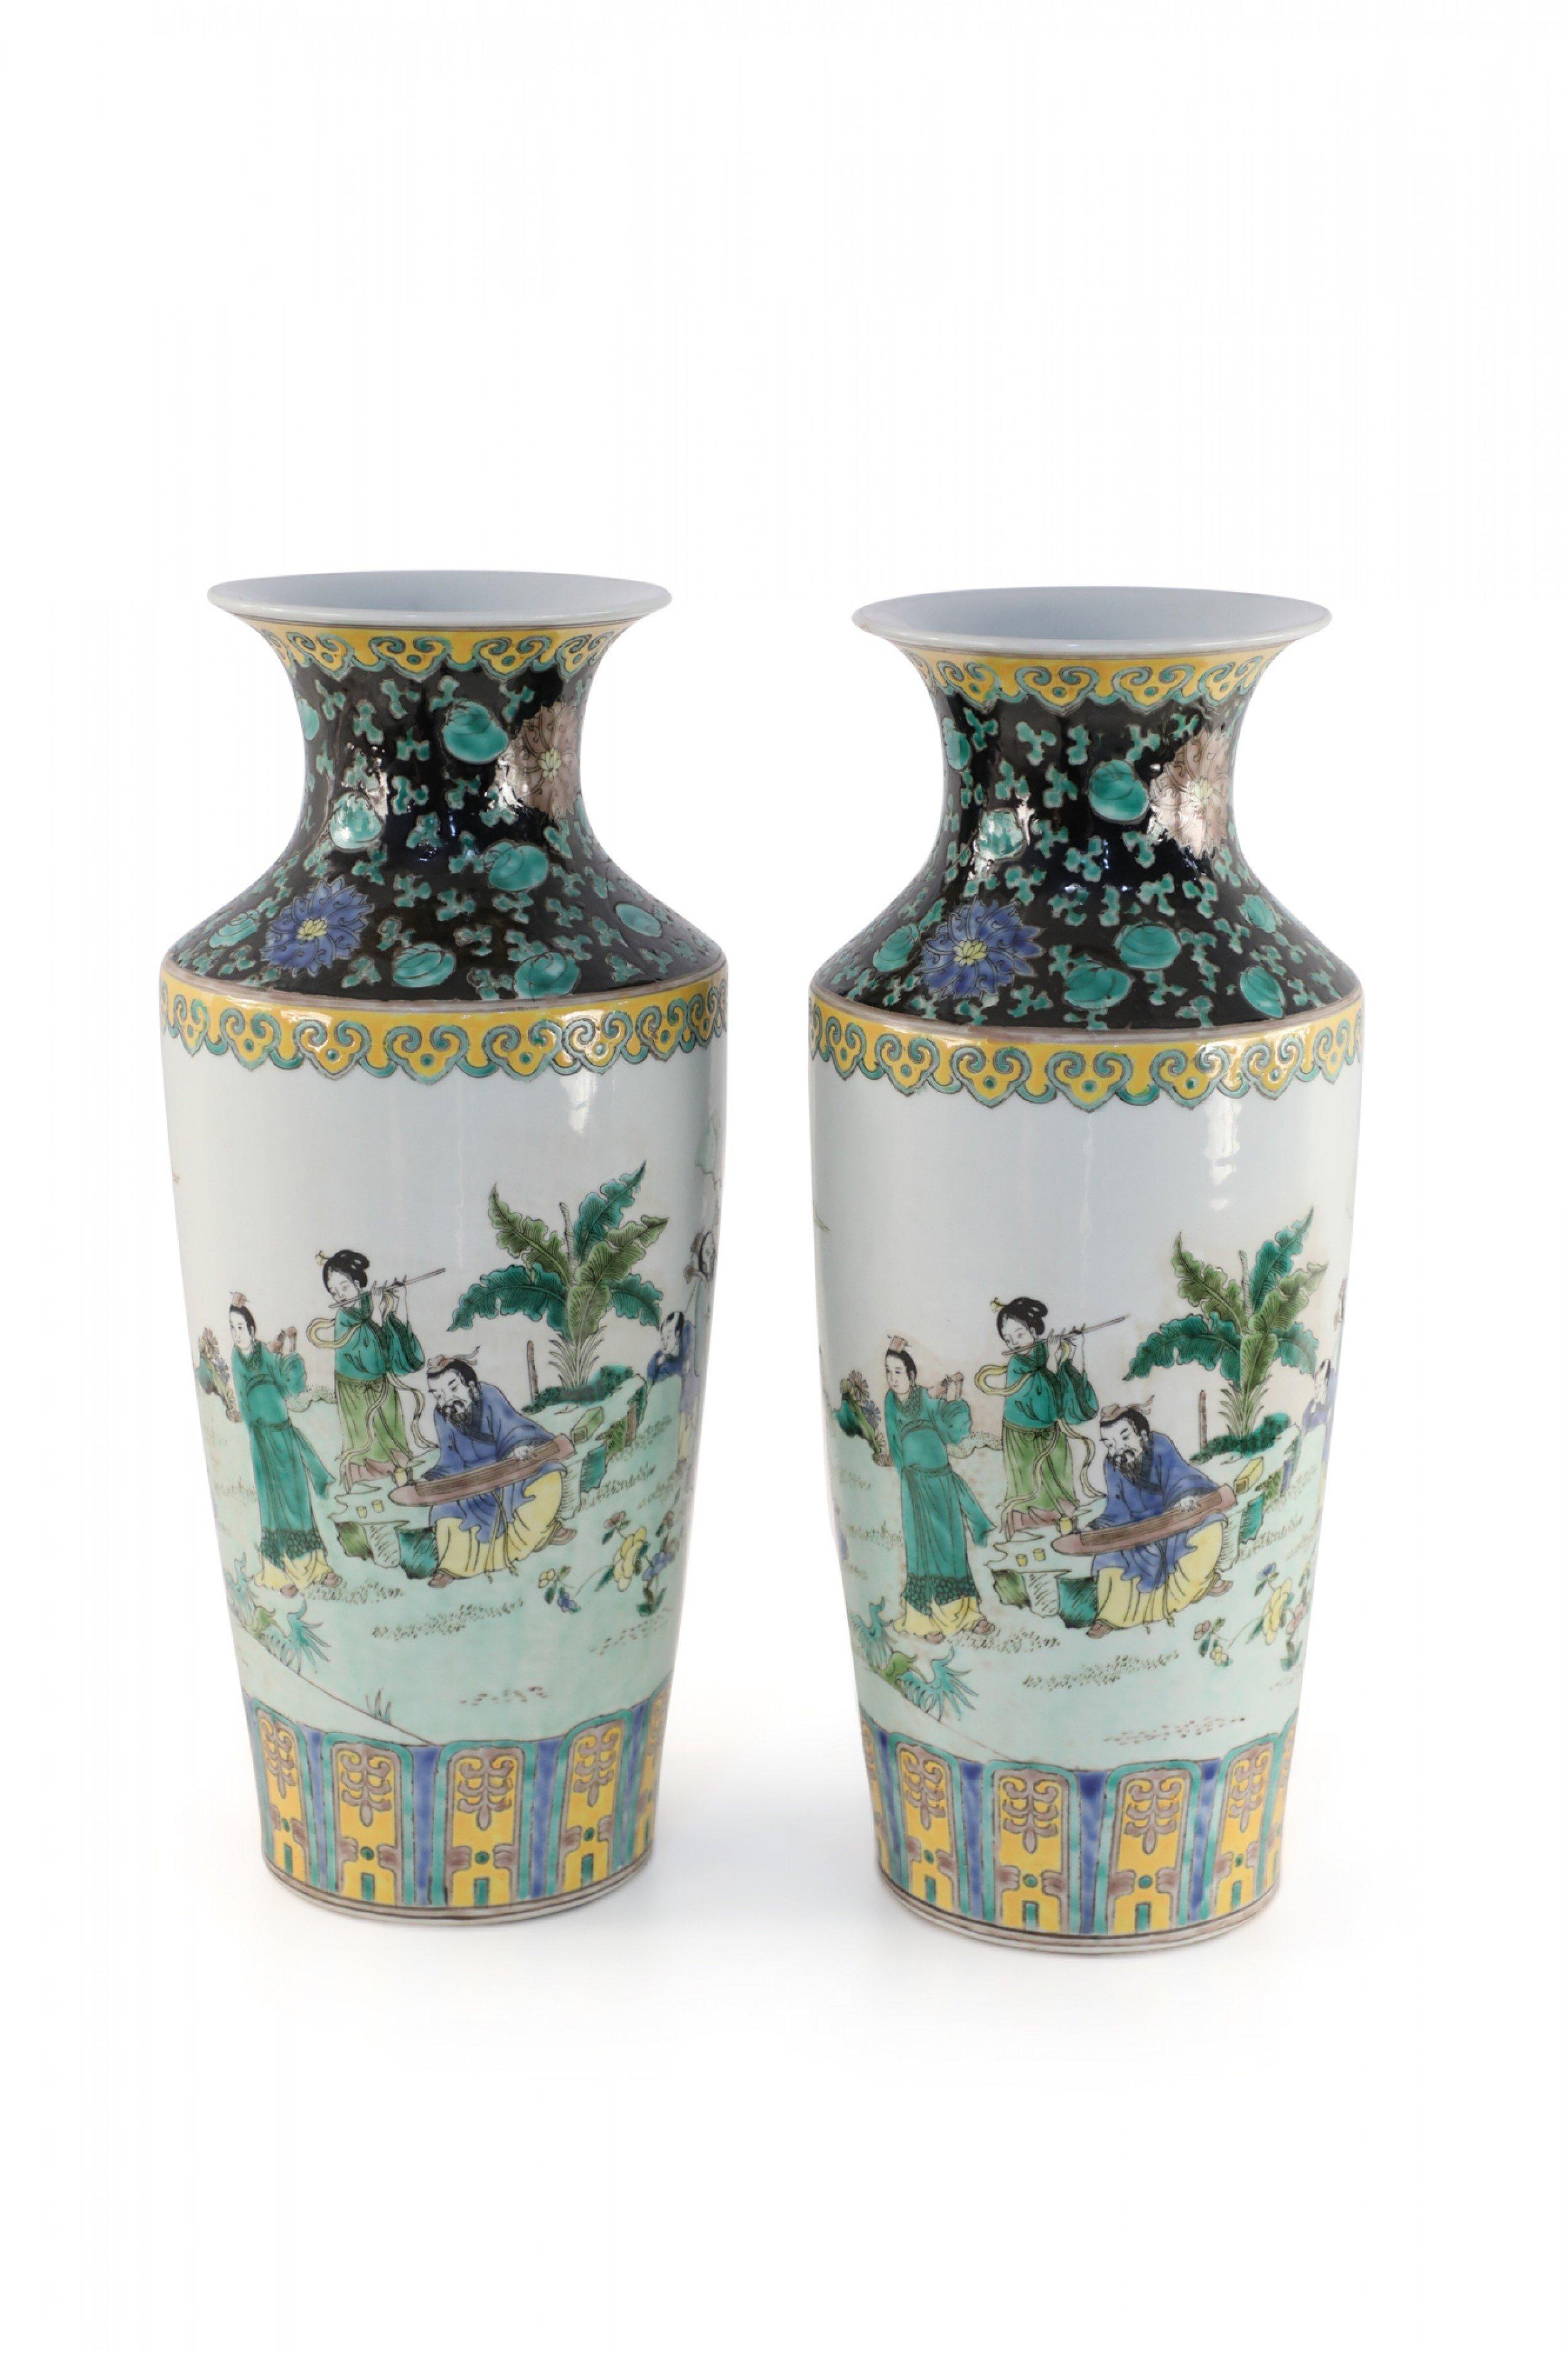 Pair of Chinese Qing Dynasty Kangxi Period (late 17th to early 18th century) sleeve vases depicting a garden setting on a celadon background, with designs at the top and base in Jingdezhen sancai glaze color revival tones. (has date mark) (priced as